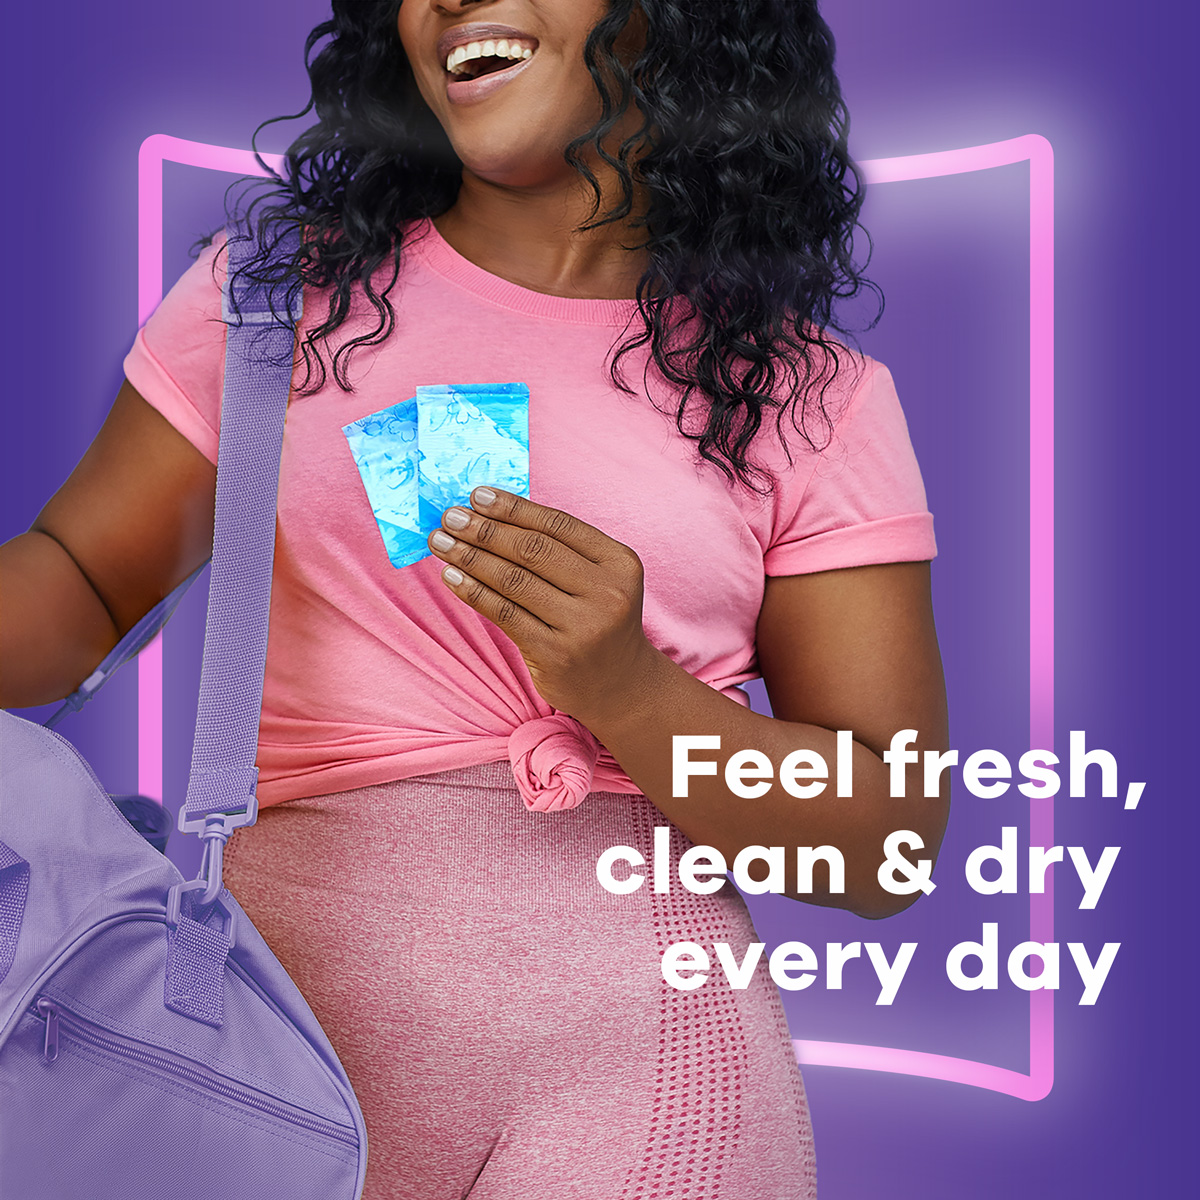 Feel fresh, clean &dry every day